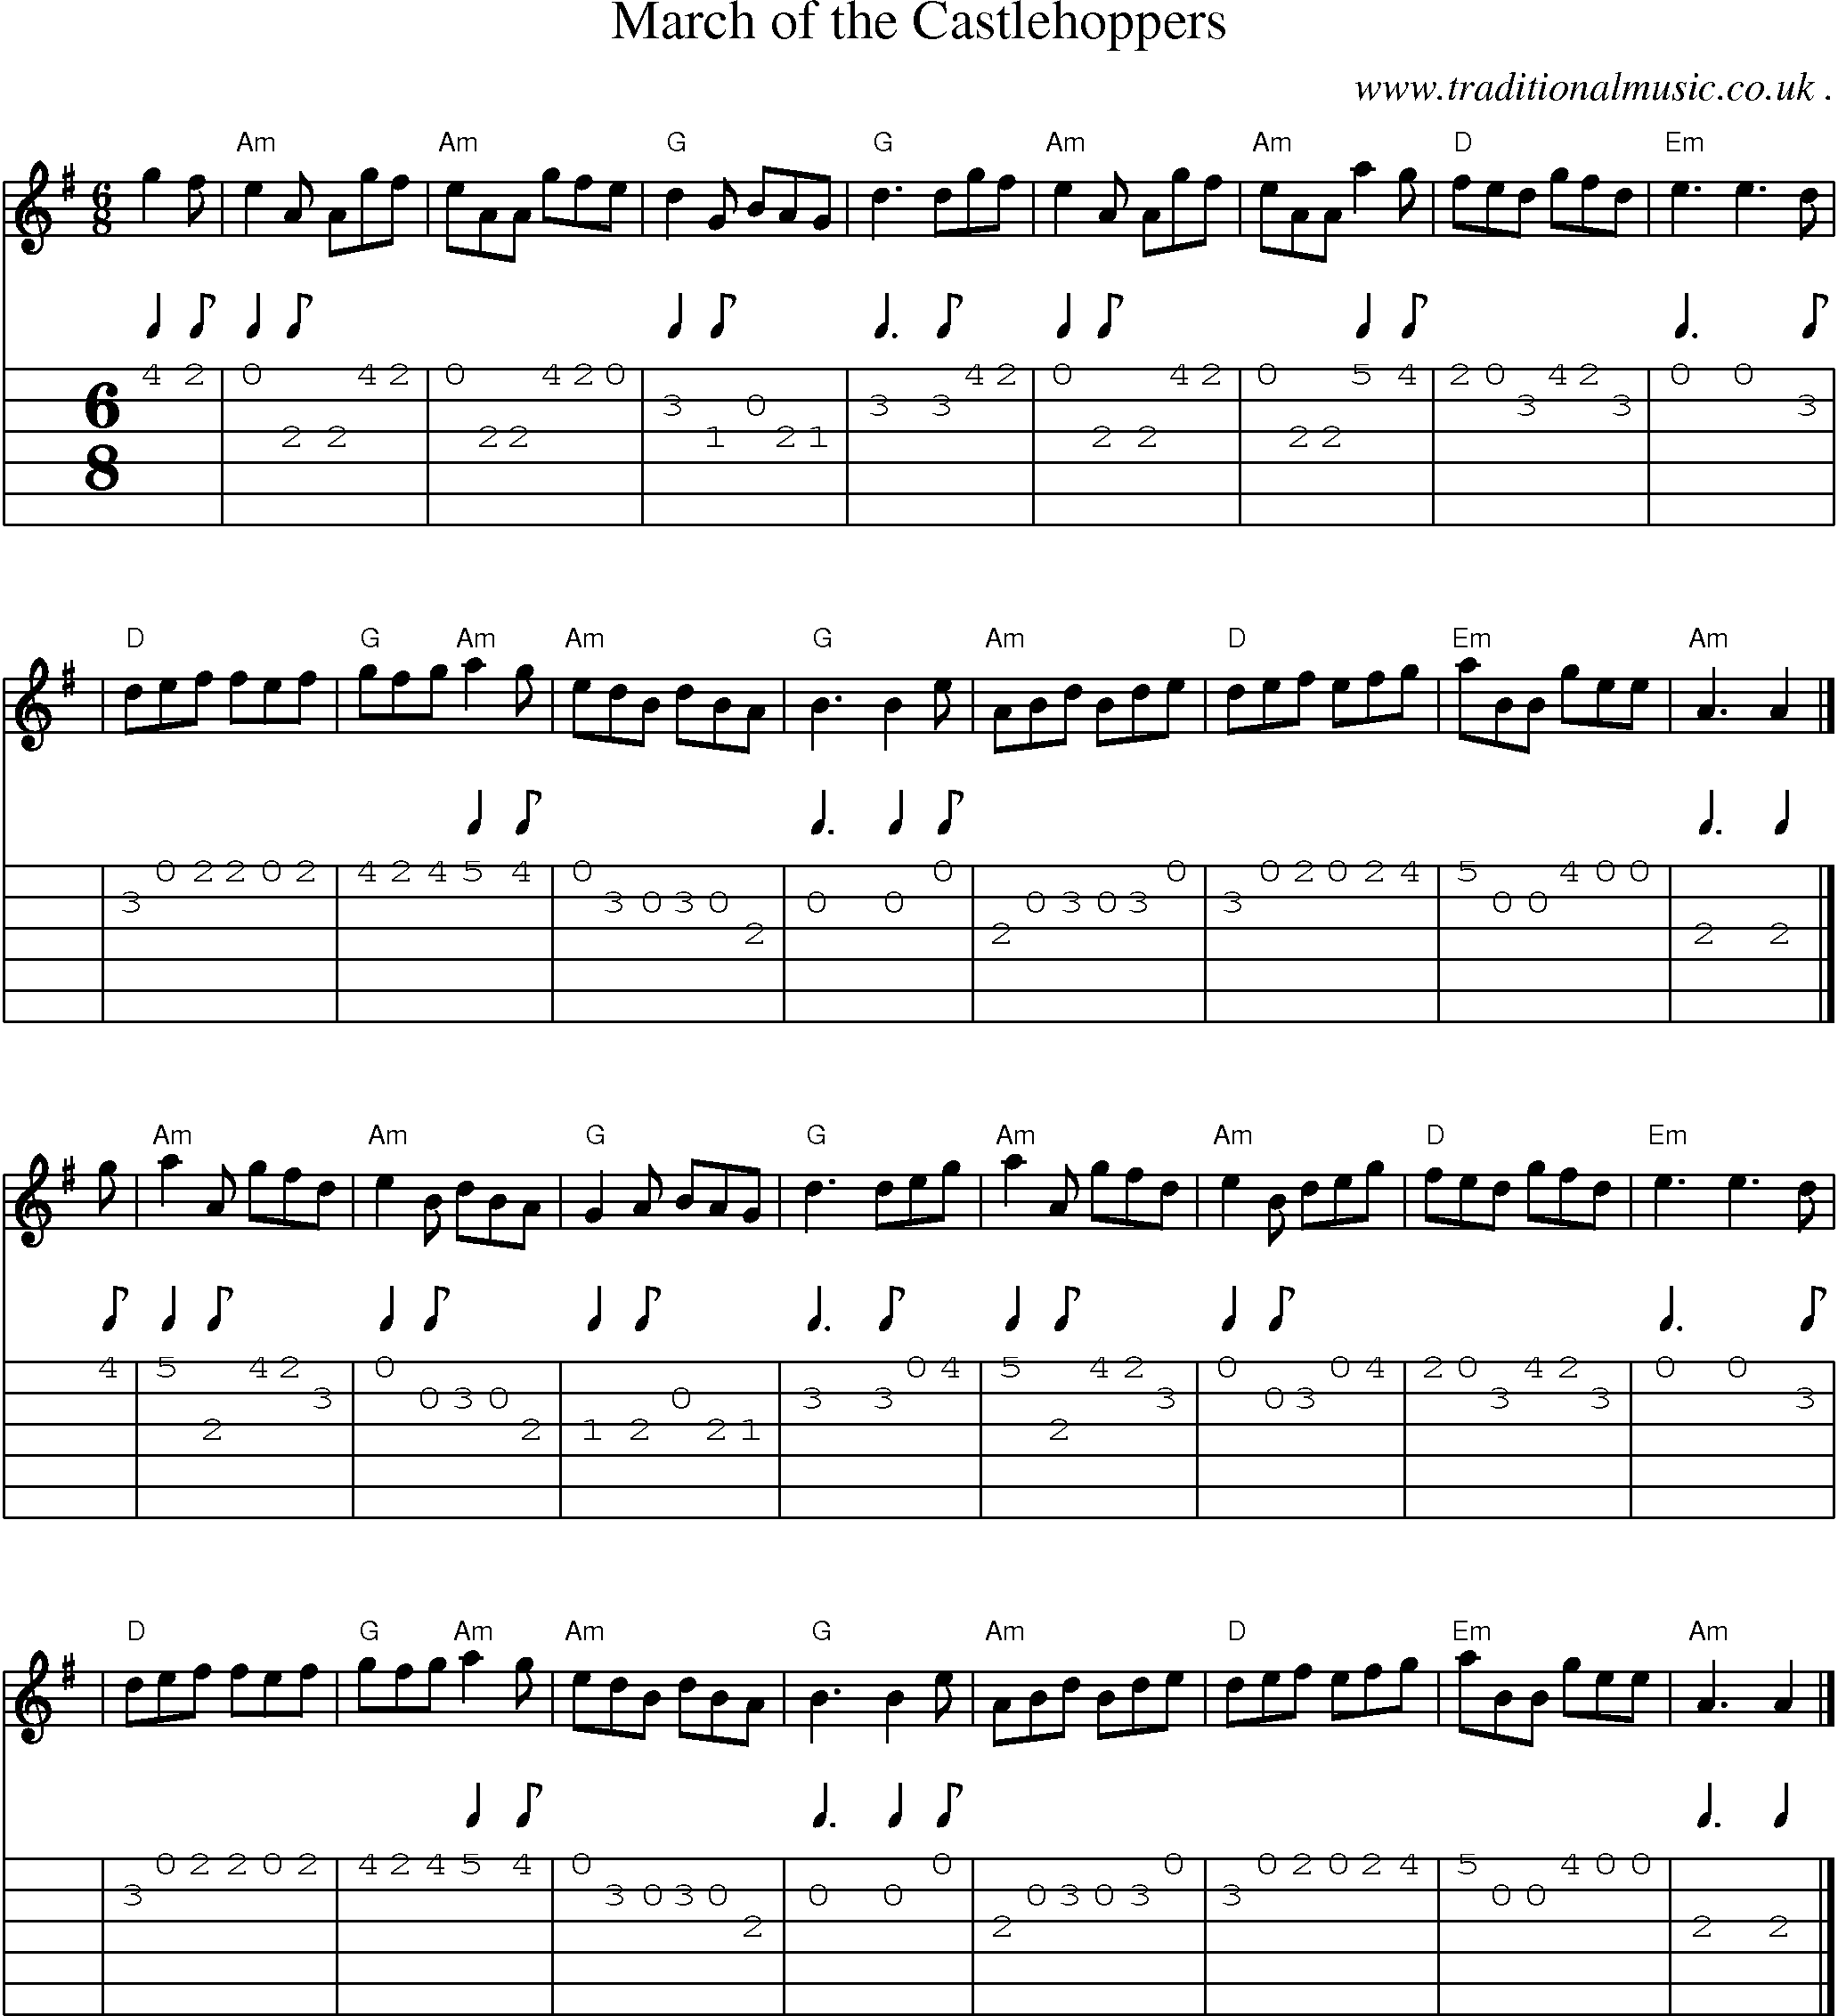 Sheet-music  score, Chords and Guitar Tabs for March Of The Castlehoppers